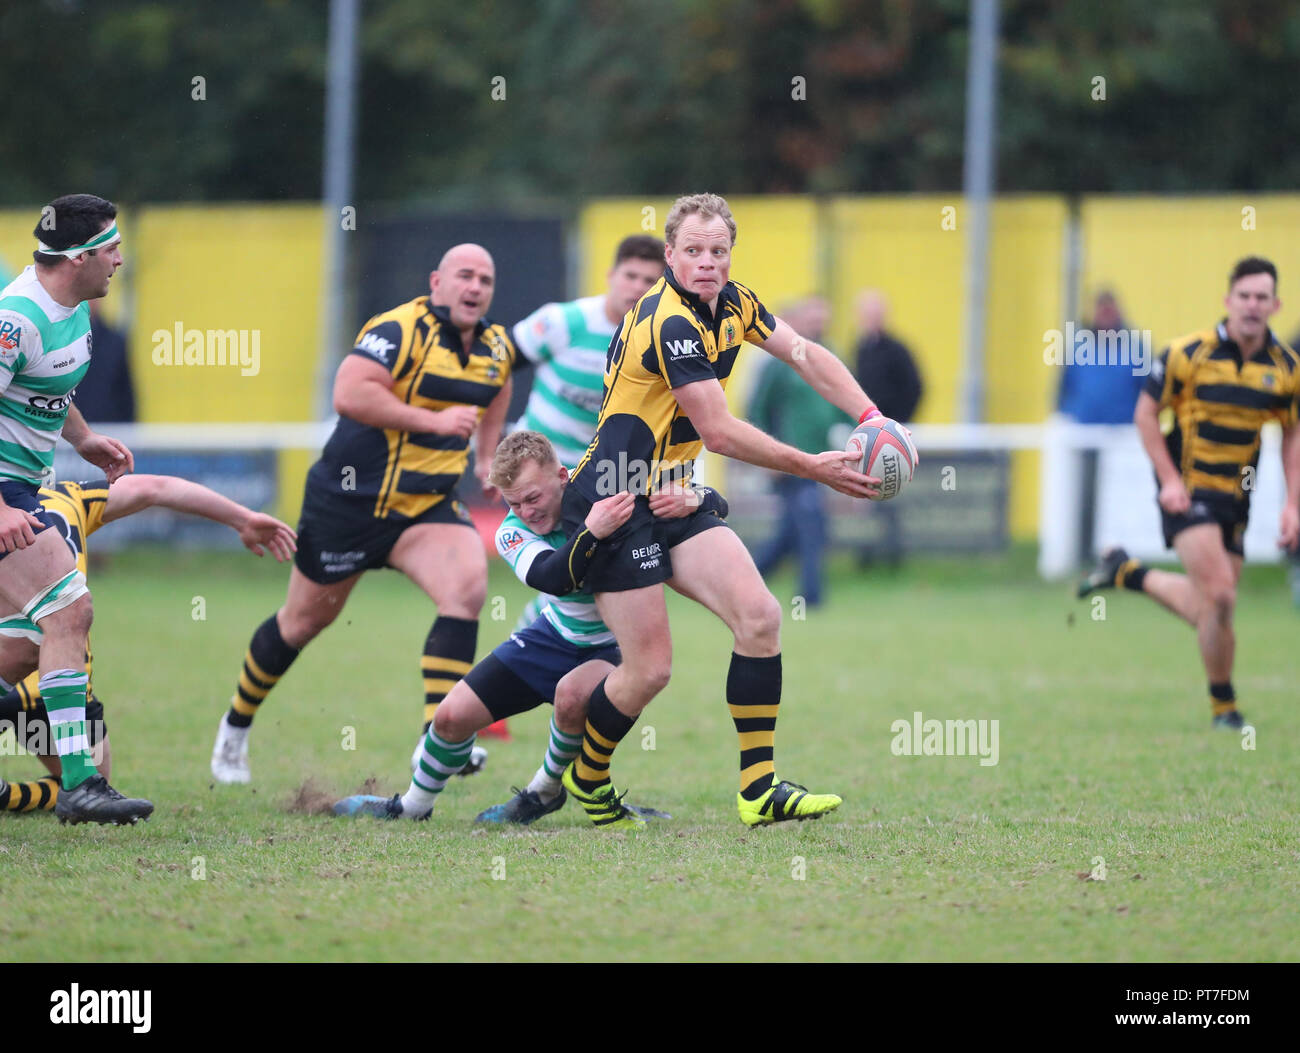 Leicester, England. Rugby Union, Hinckley rfc v South Leicester rfc.  Scott Hamilton on the charge for Hinckley during the RFU National League 2 North (NL2N) game played at the Leicester  Road Stadium.  © Phil Hutchinson / Alamy Live News Stock Photo